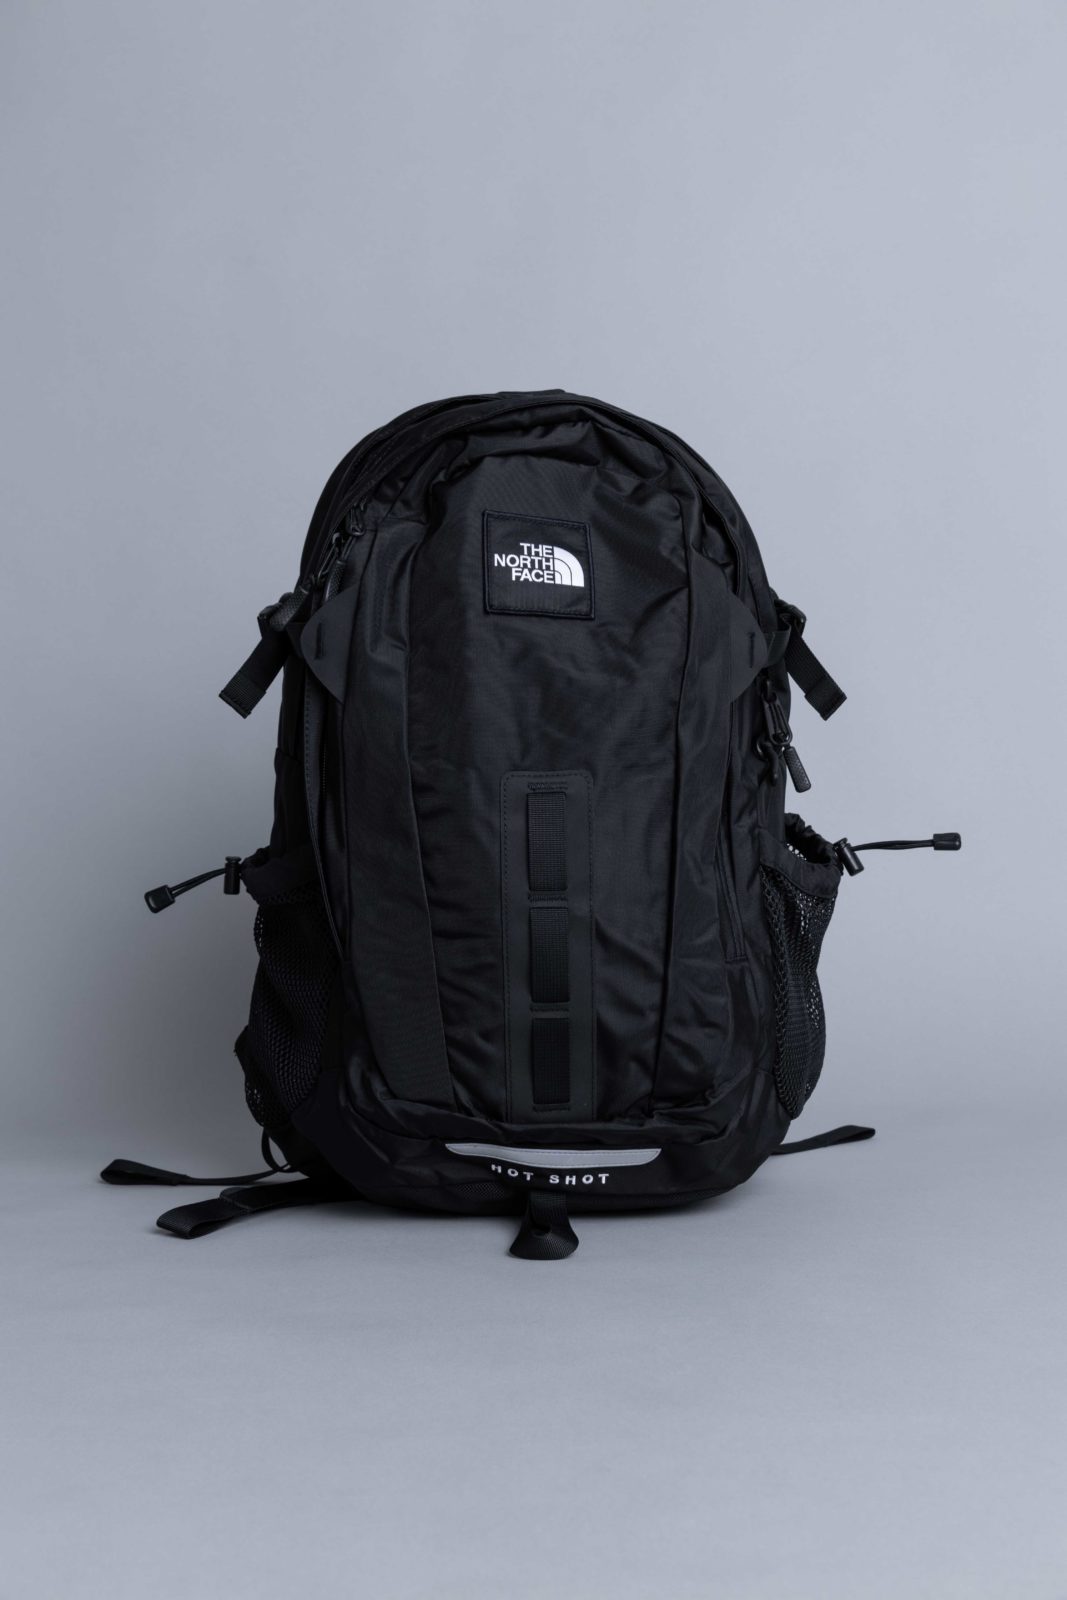 north face 30l backpack